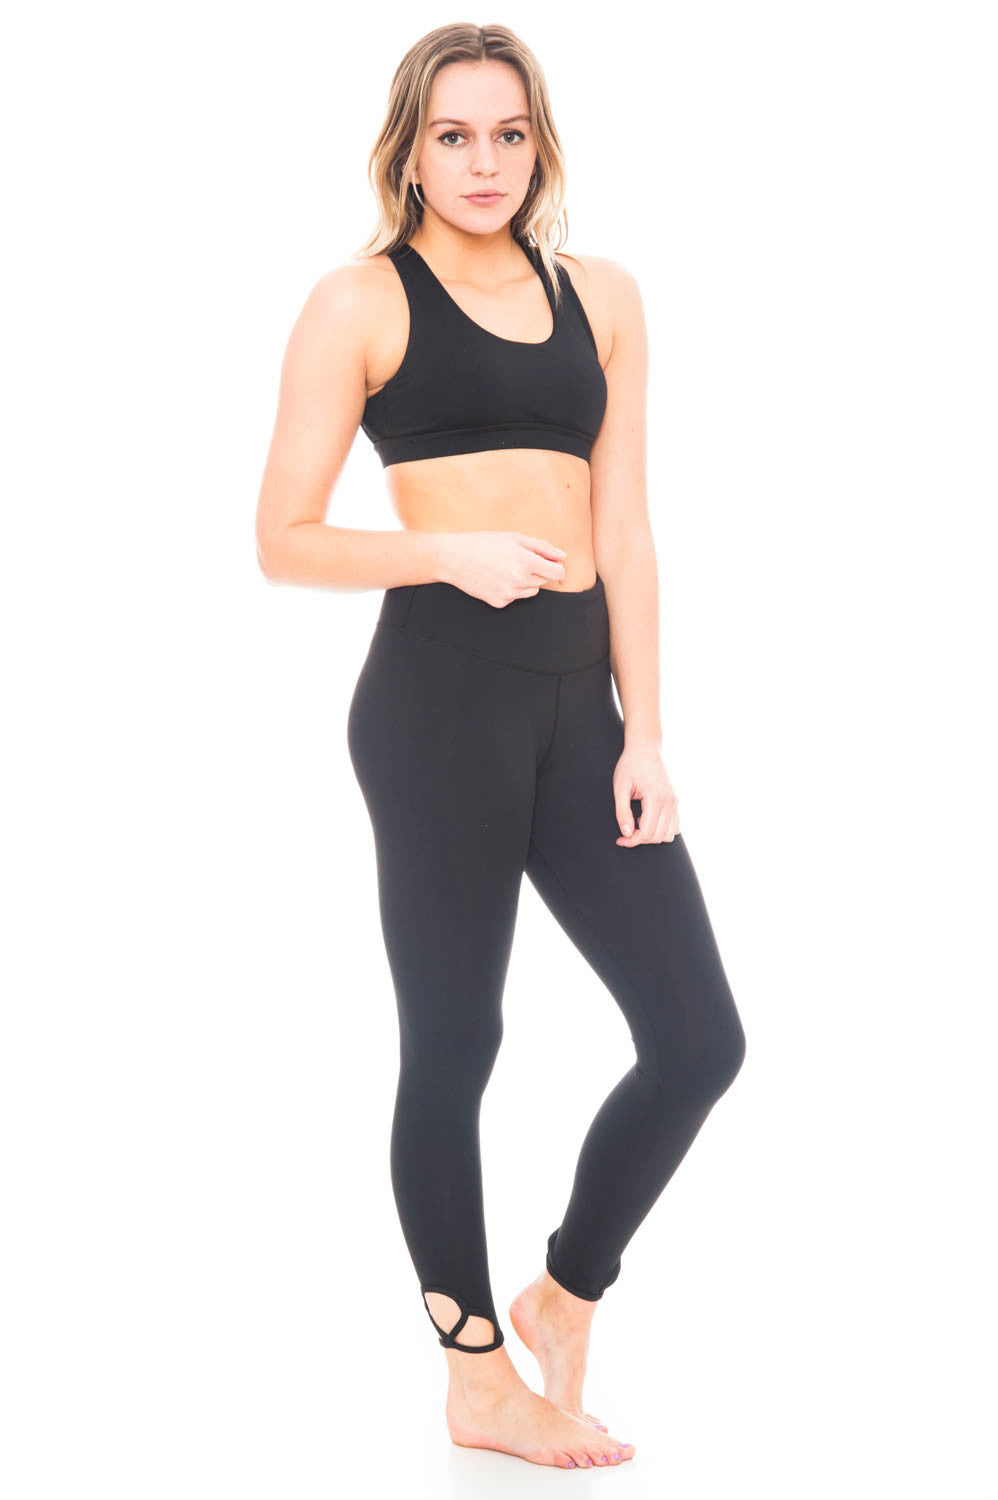 Legging - Criss Cross Side Detail Yoga Pant by Motion by Coalition